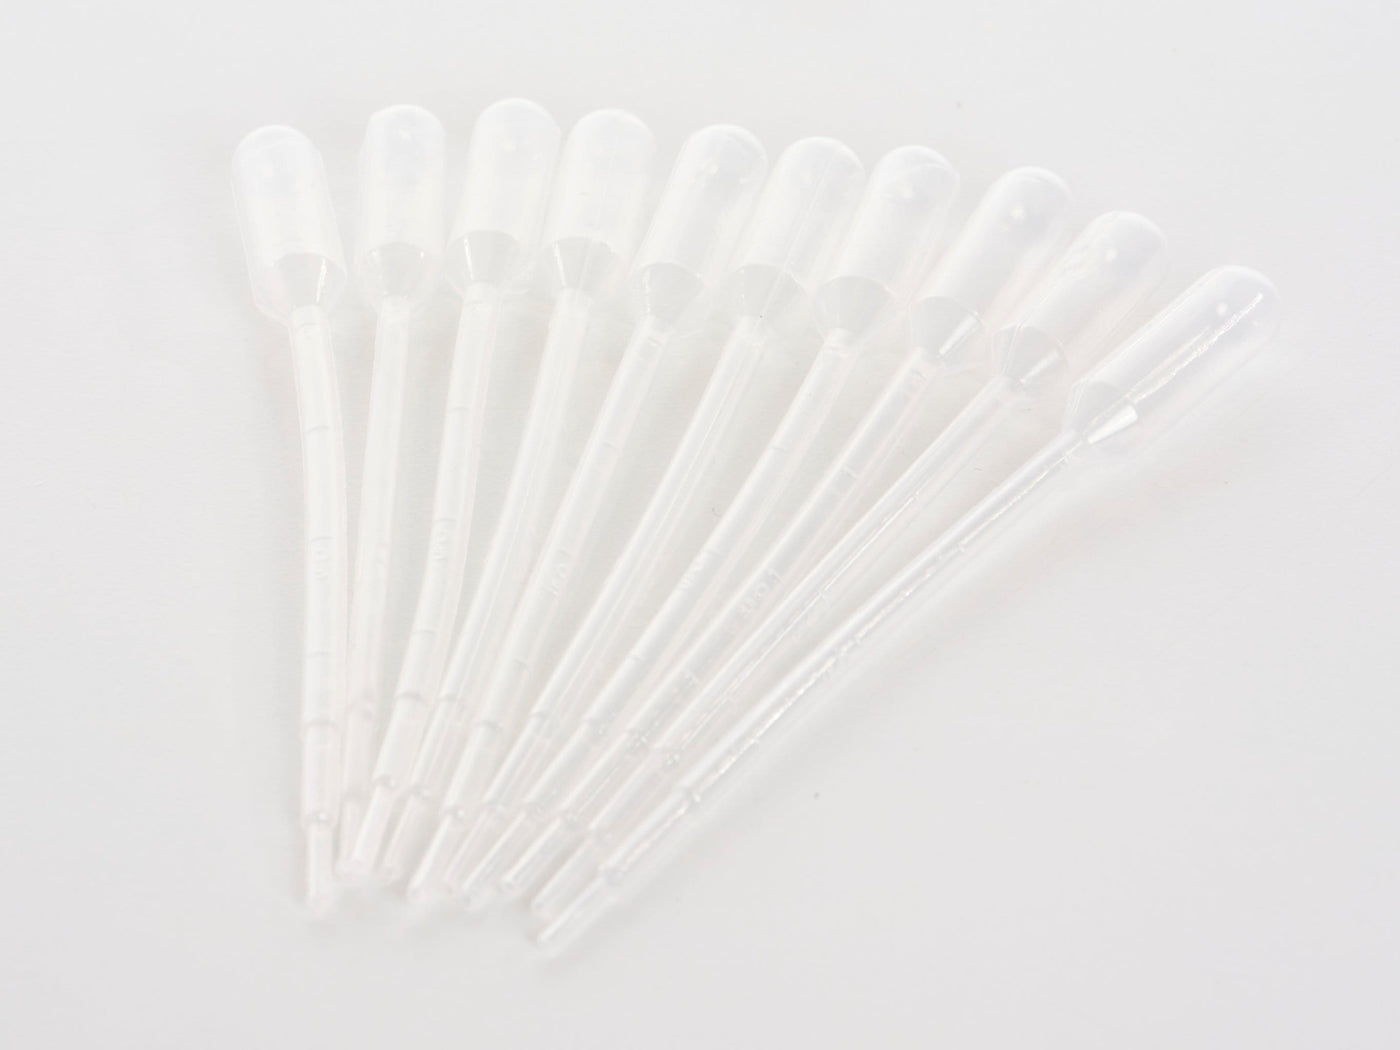 1ml Plastic Transfer Pipettes - 10 pack - Oil Life Canada - Canada's Best Essential Oil Supplies